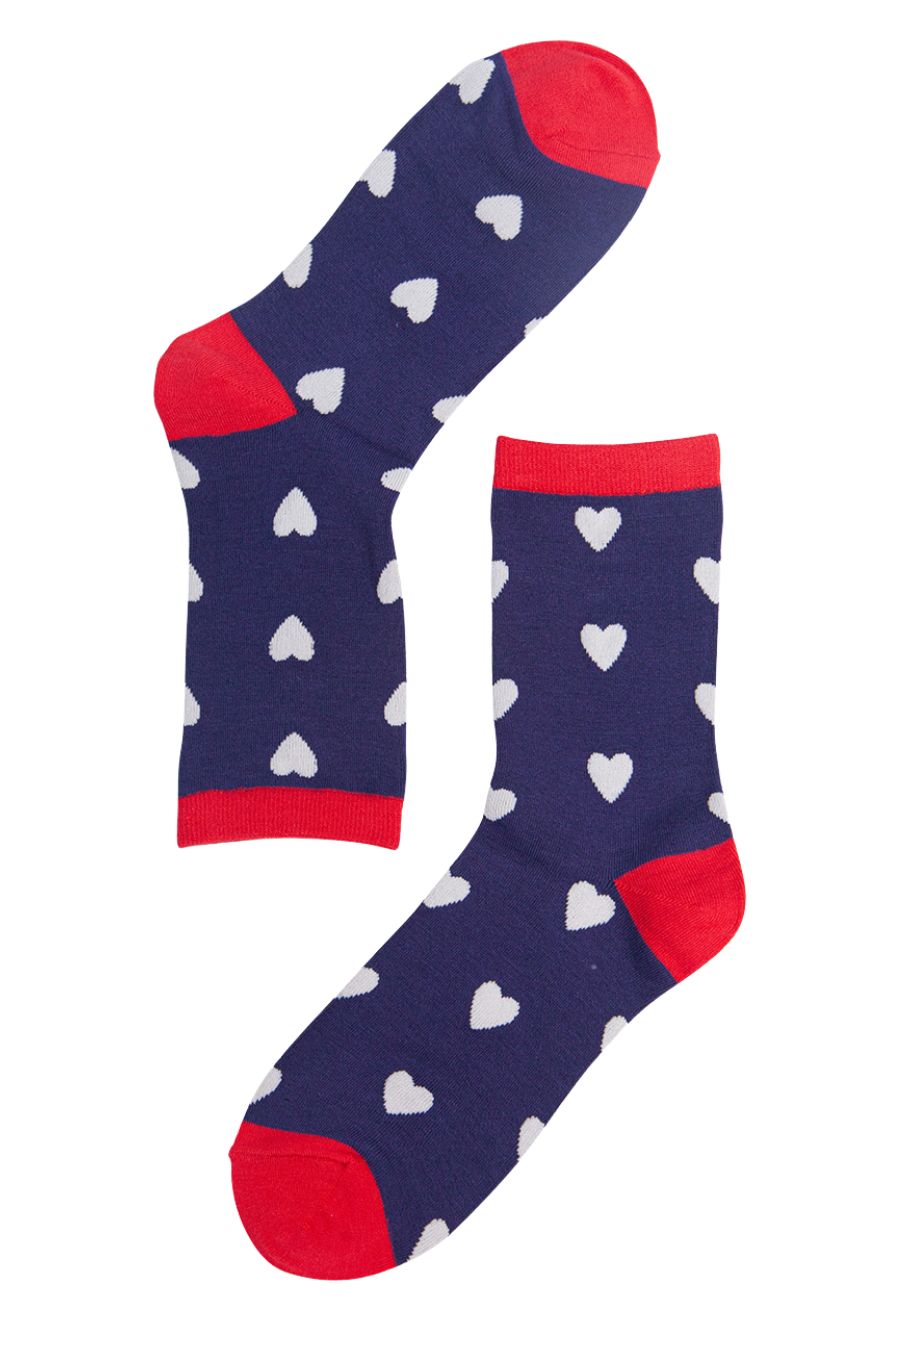 navy blue, red bamboo socks with all over white love hearts